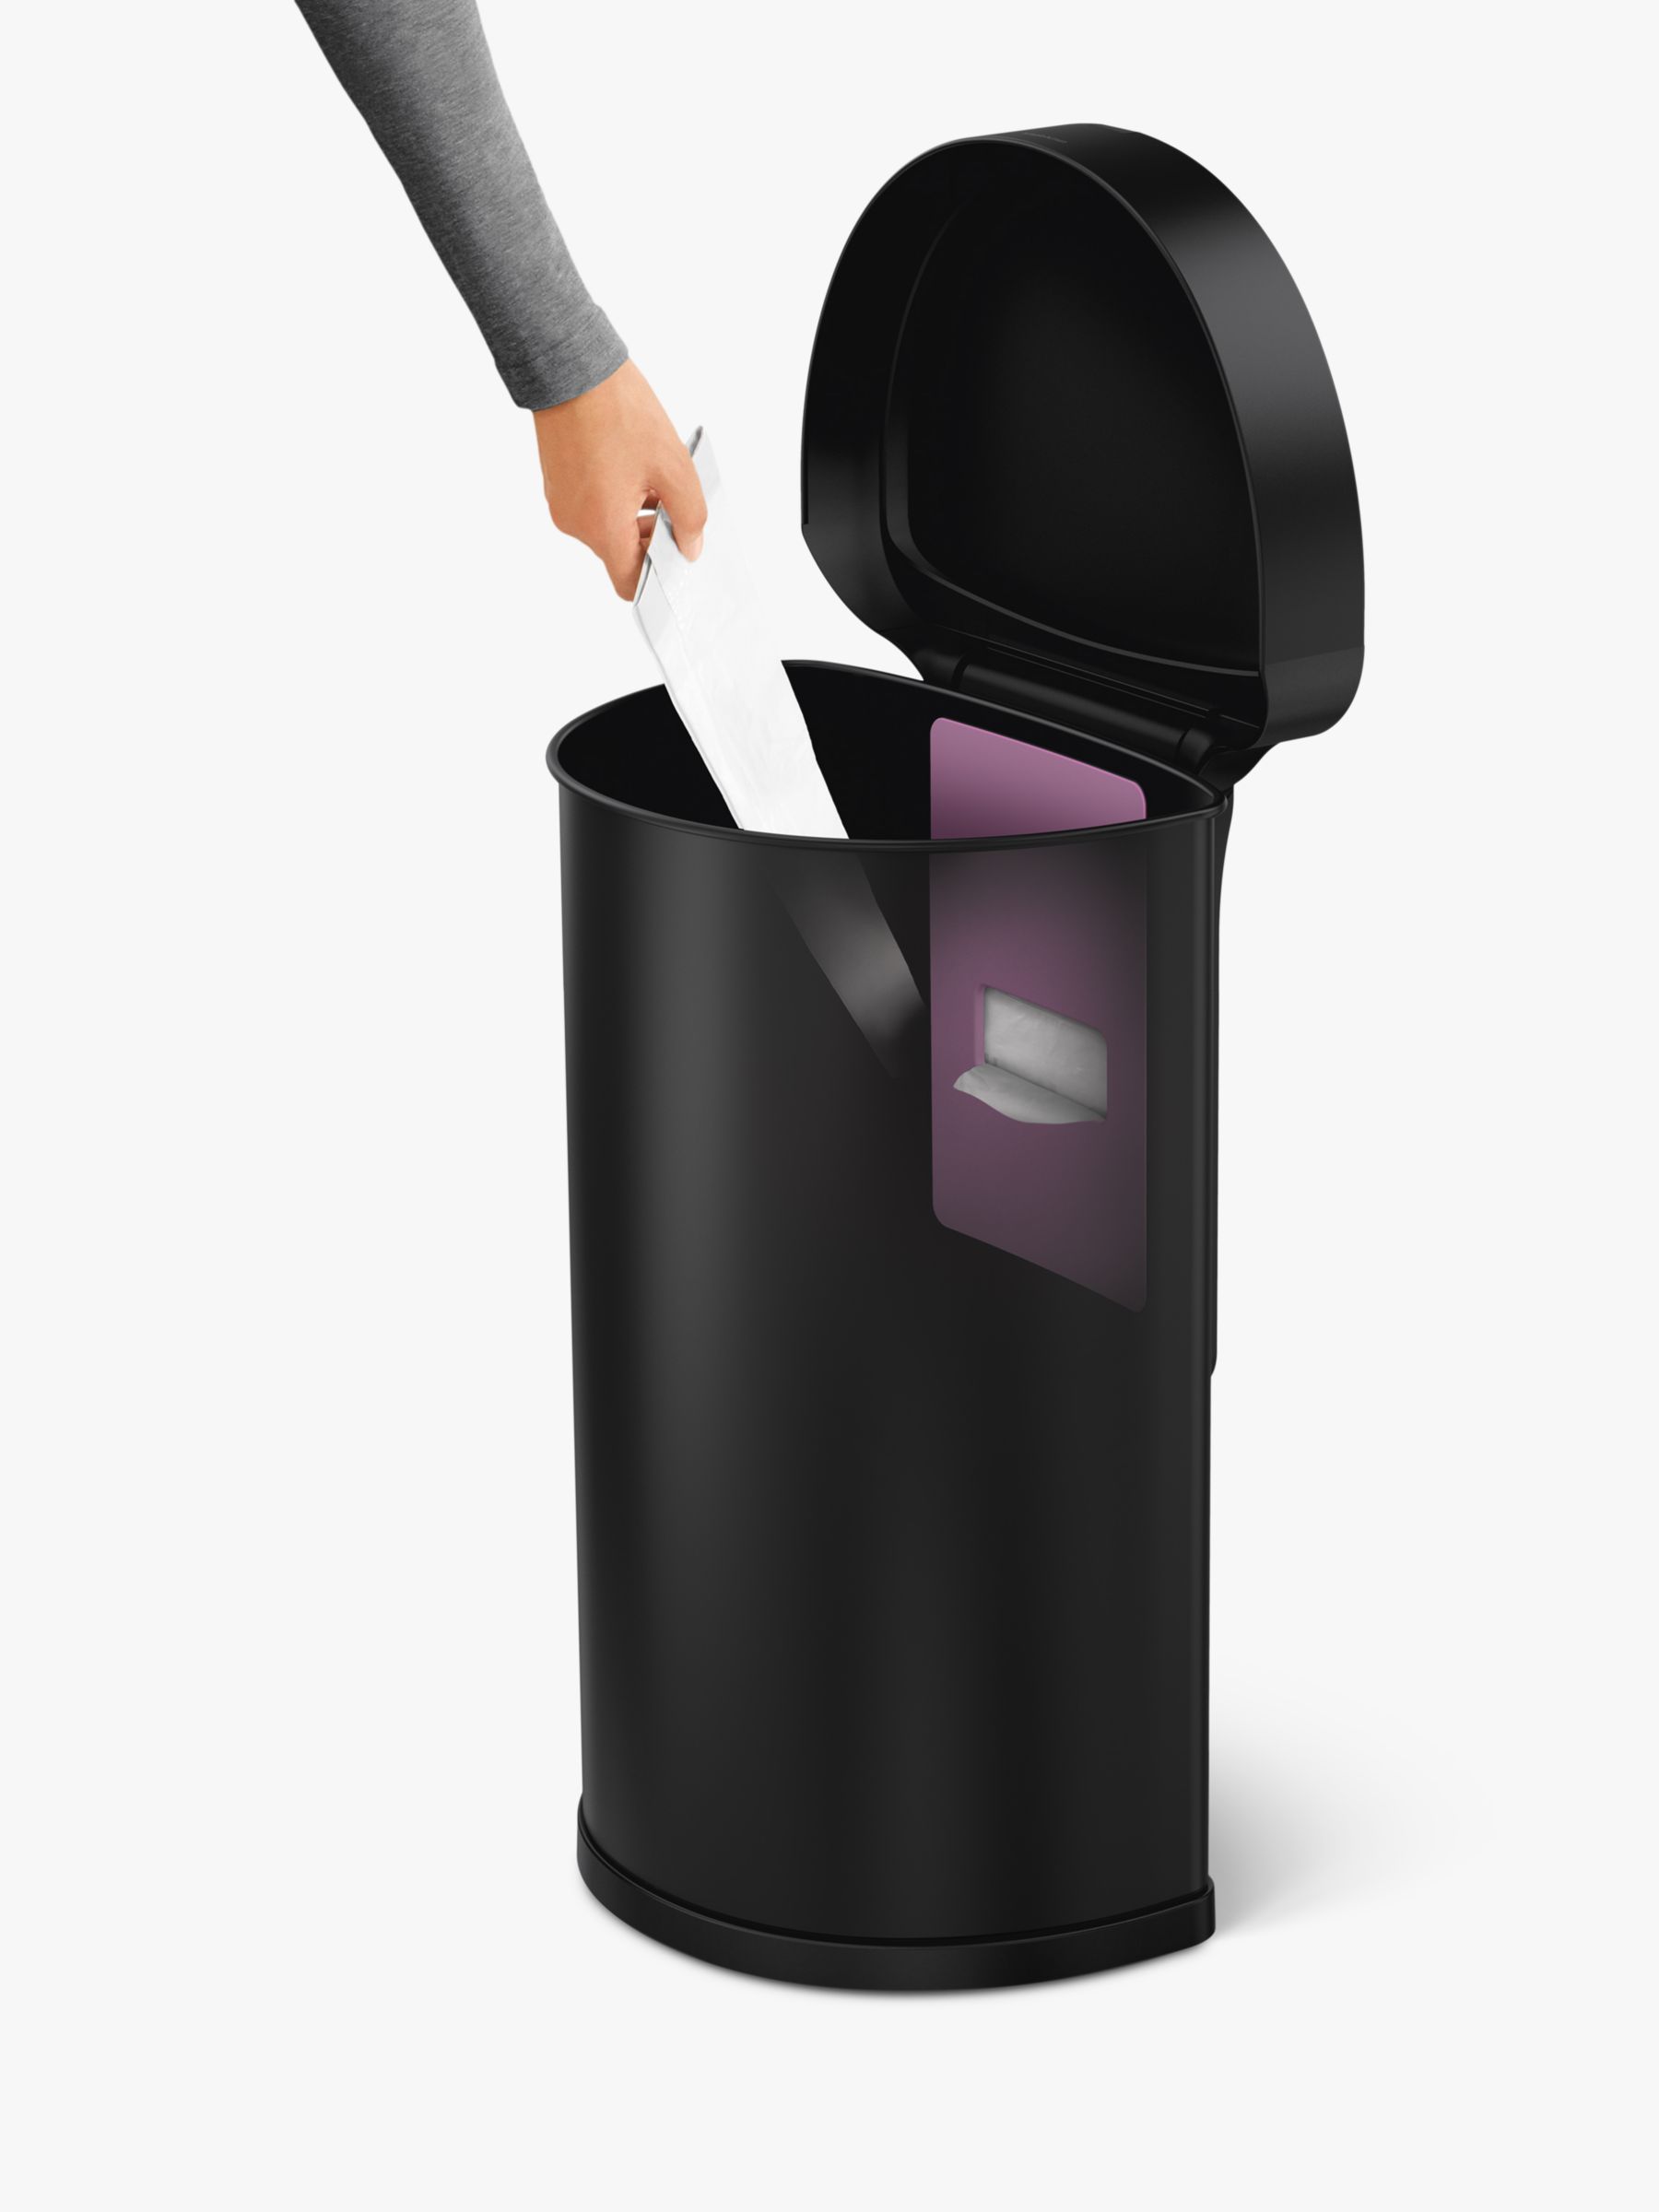 Simplehuman's subservient smart bin opens when you tell it to